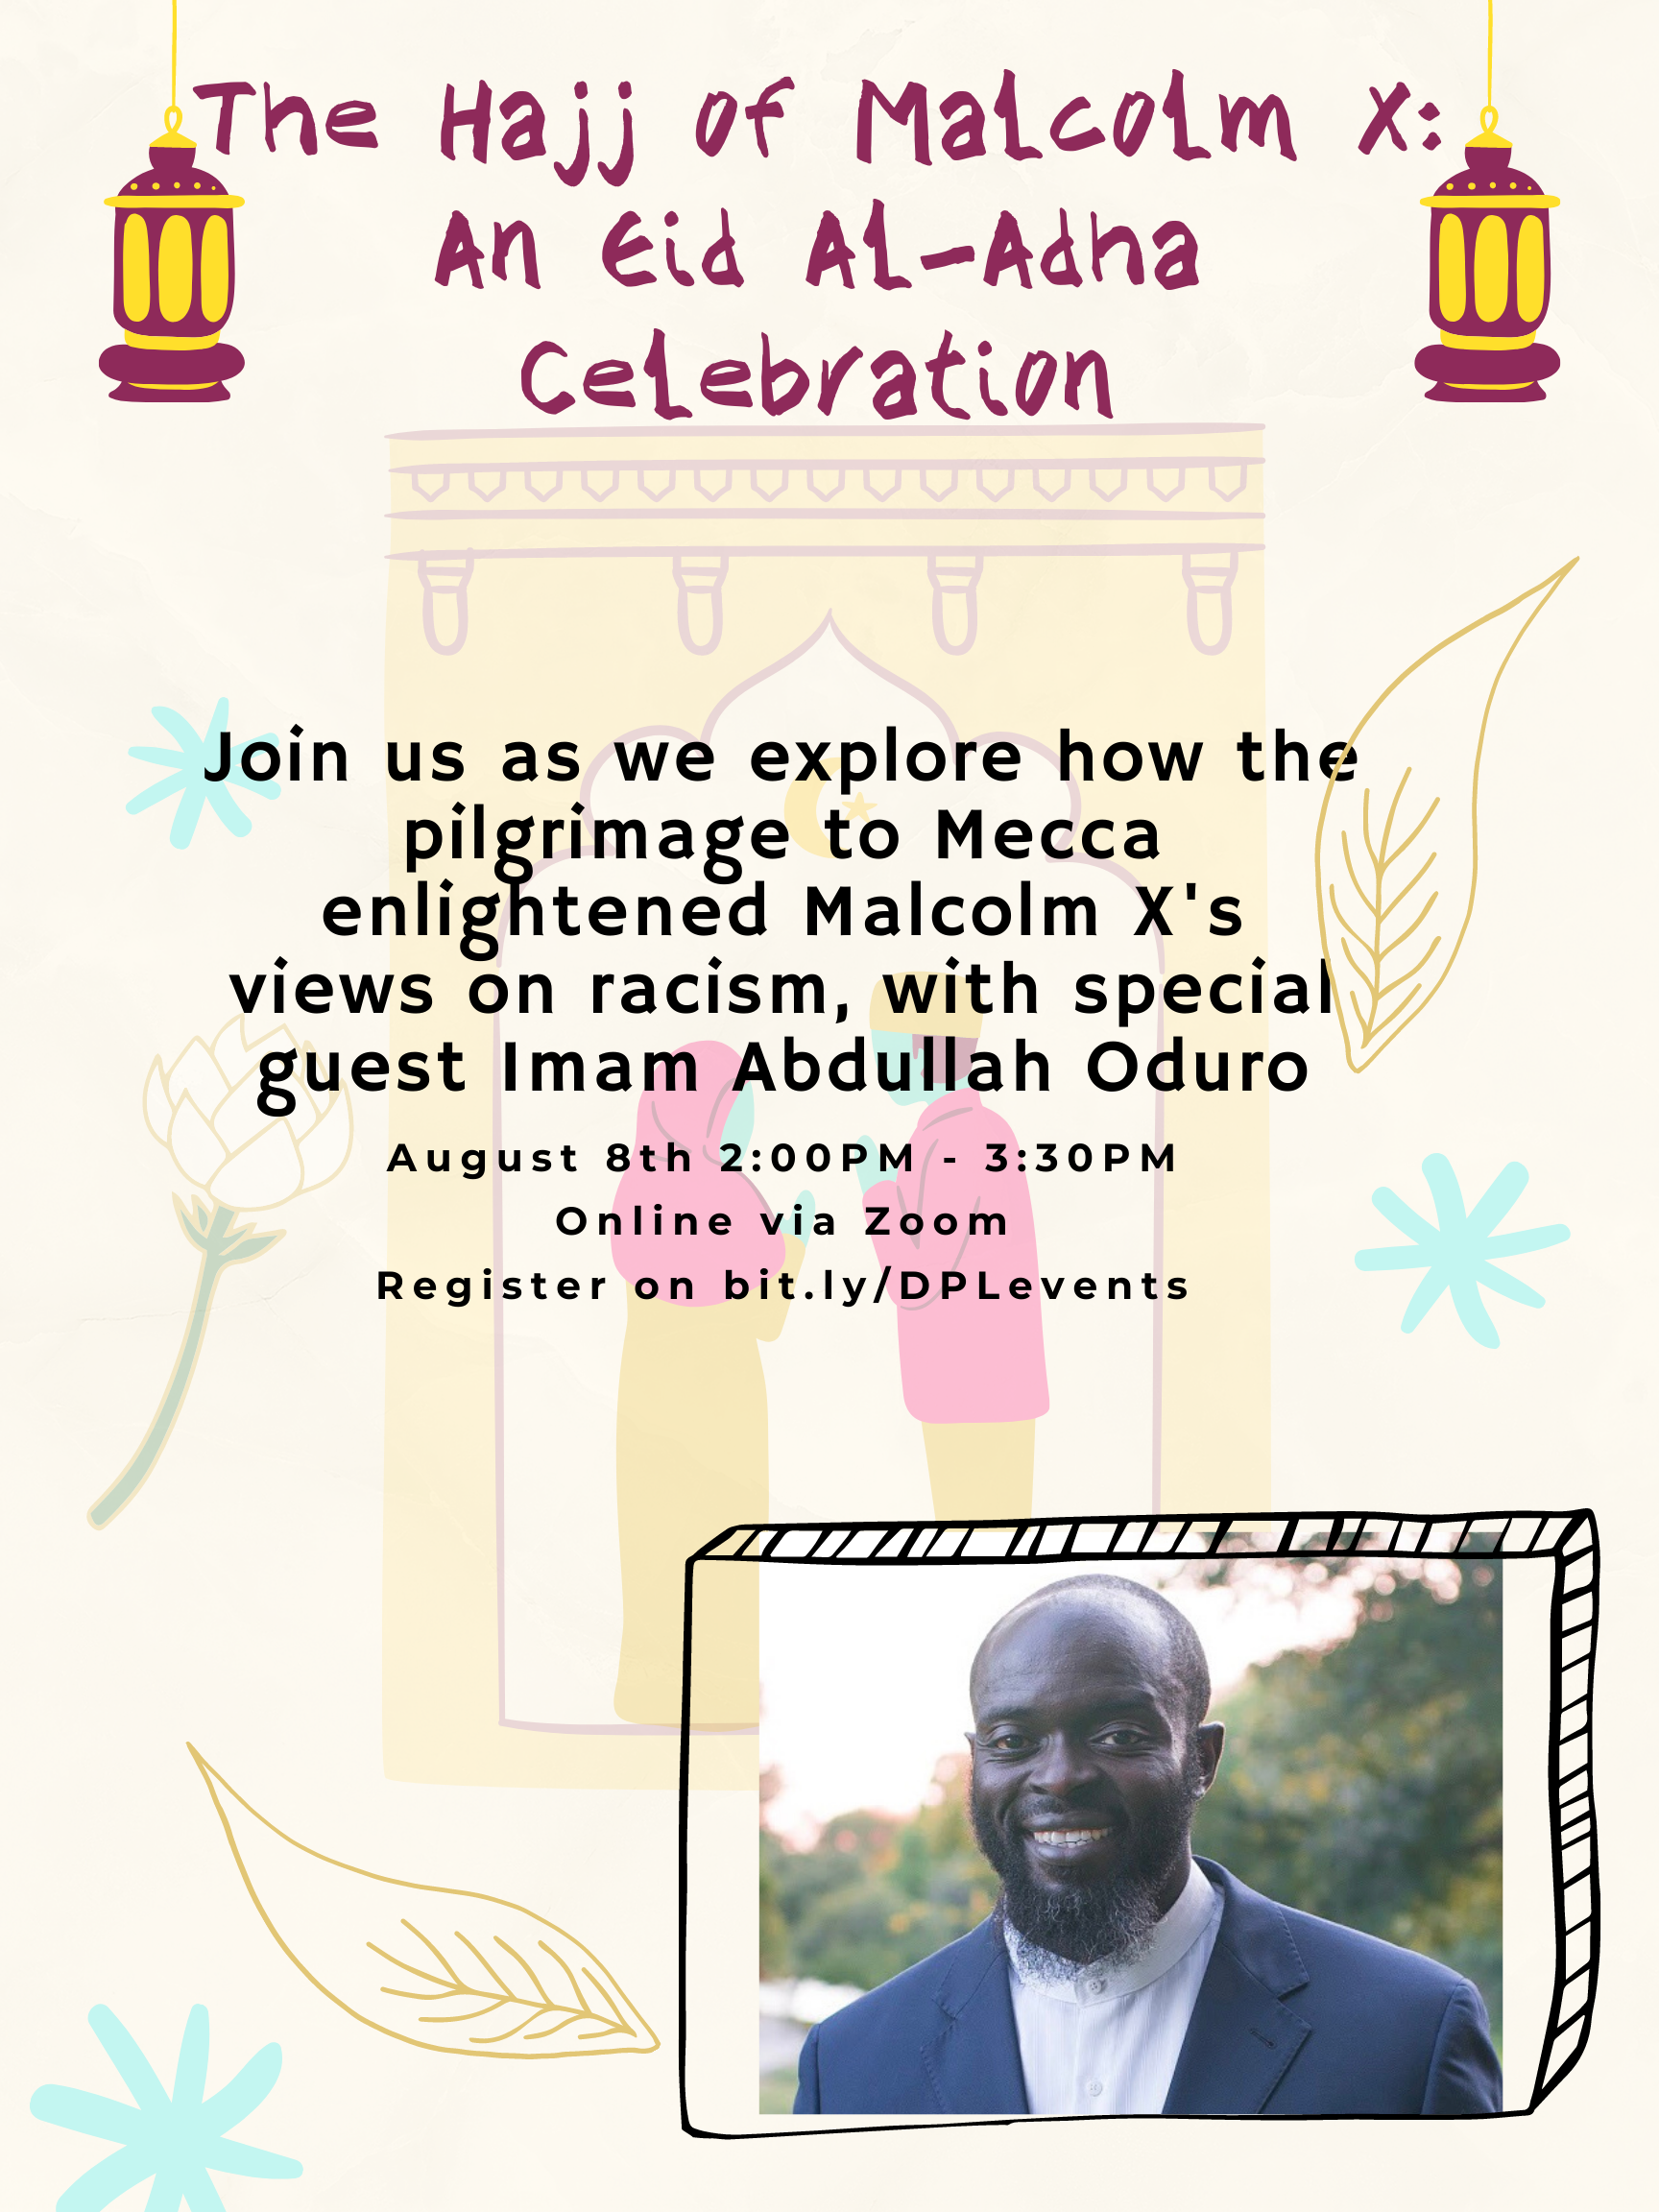 Join us for a special talk with guest Imam Abdullah Oduro to talk about how the pilgrimage to Mecca enlightened Malcolm X's views on racism. August 8th, 2:00pm - 3:30pm Online via Zoom. Registration required.